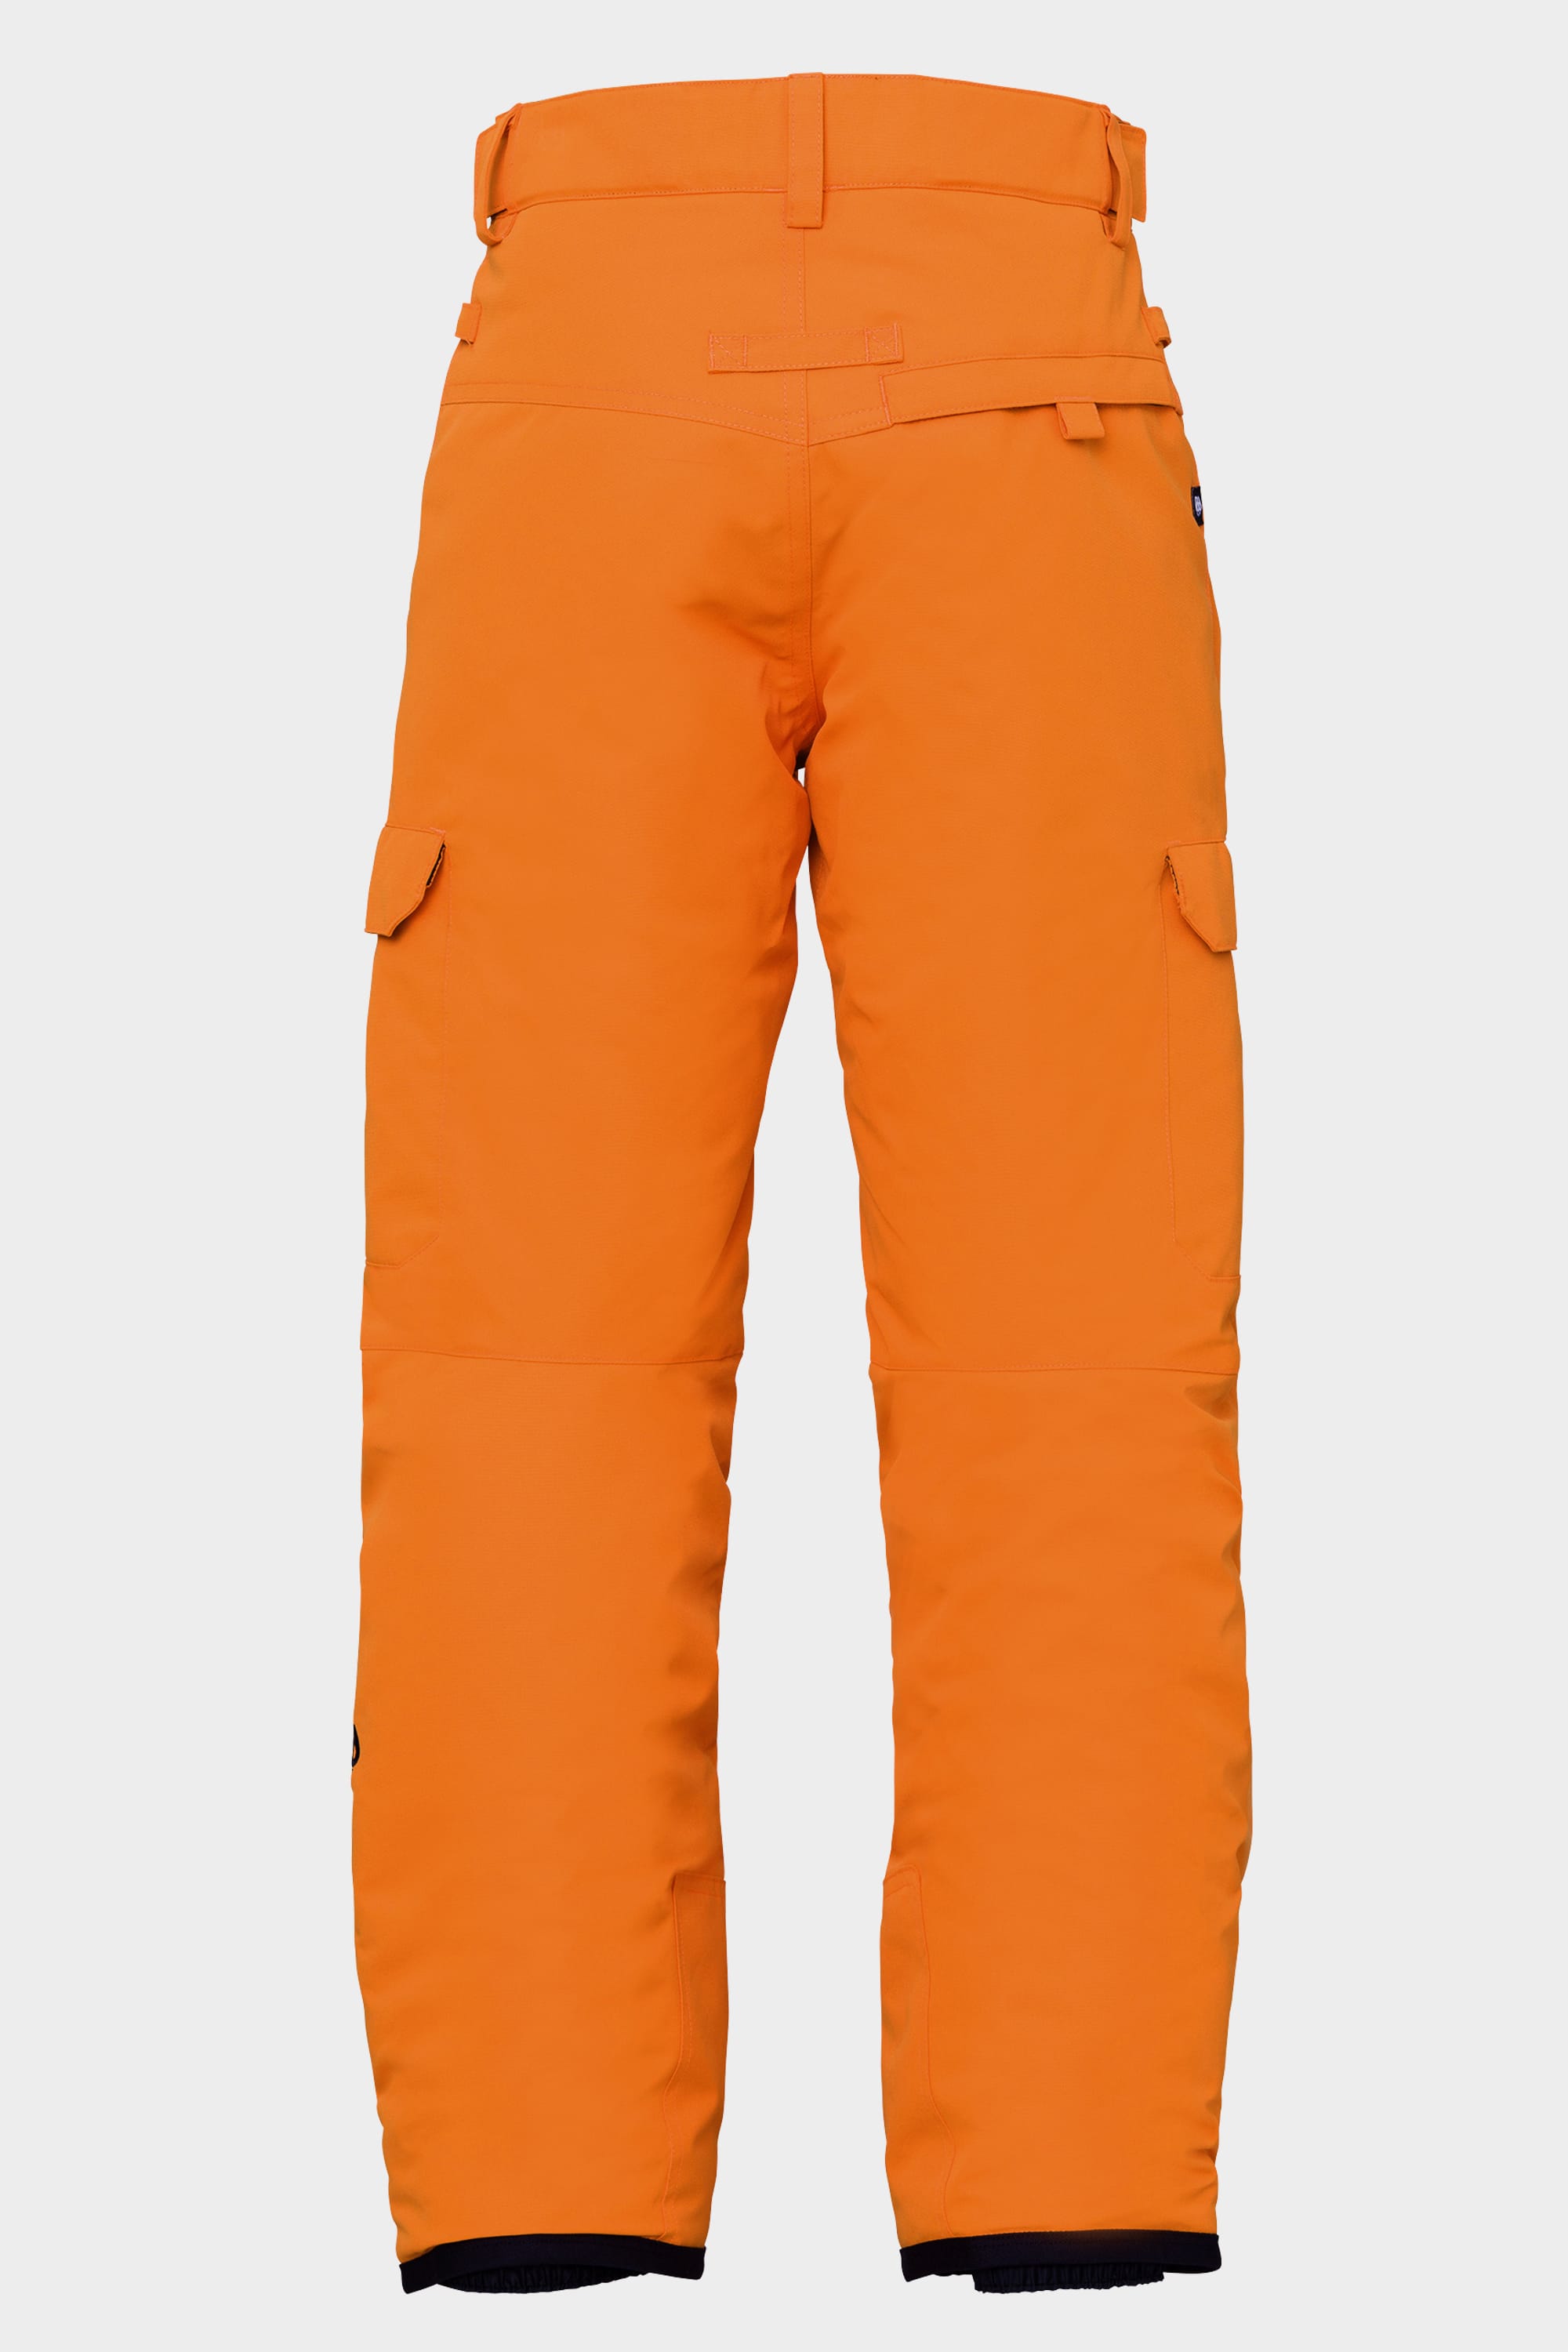 686 Boys Infinity Cargo Insulated Pant